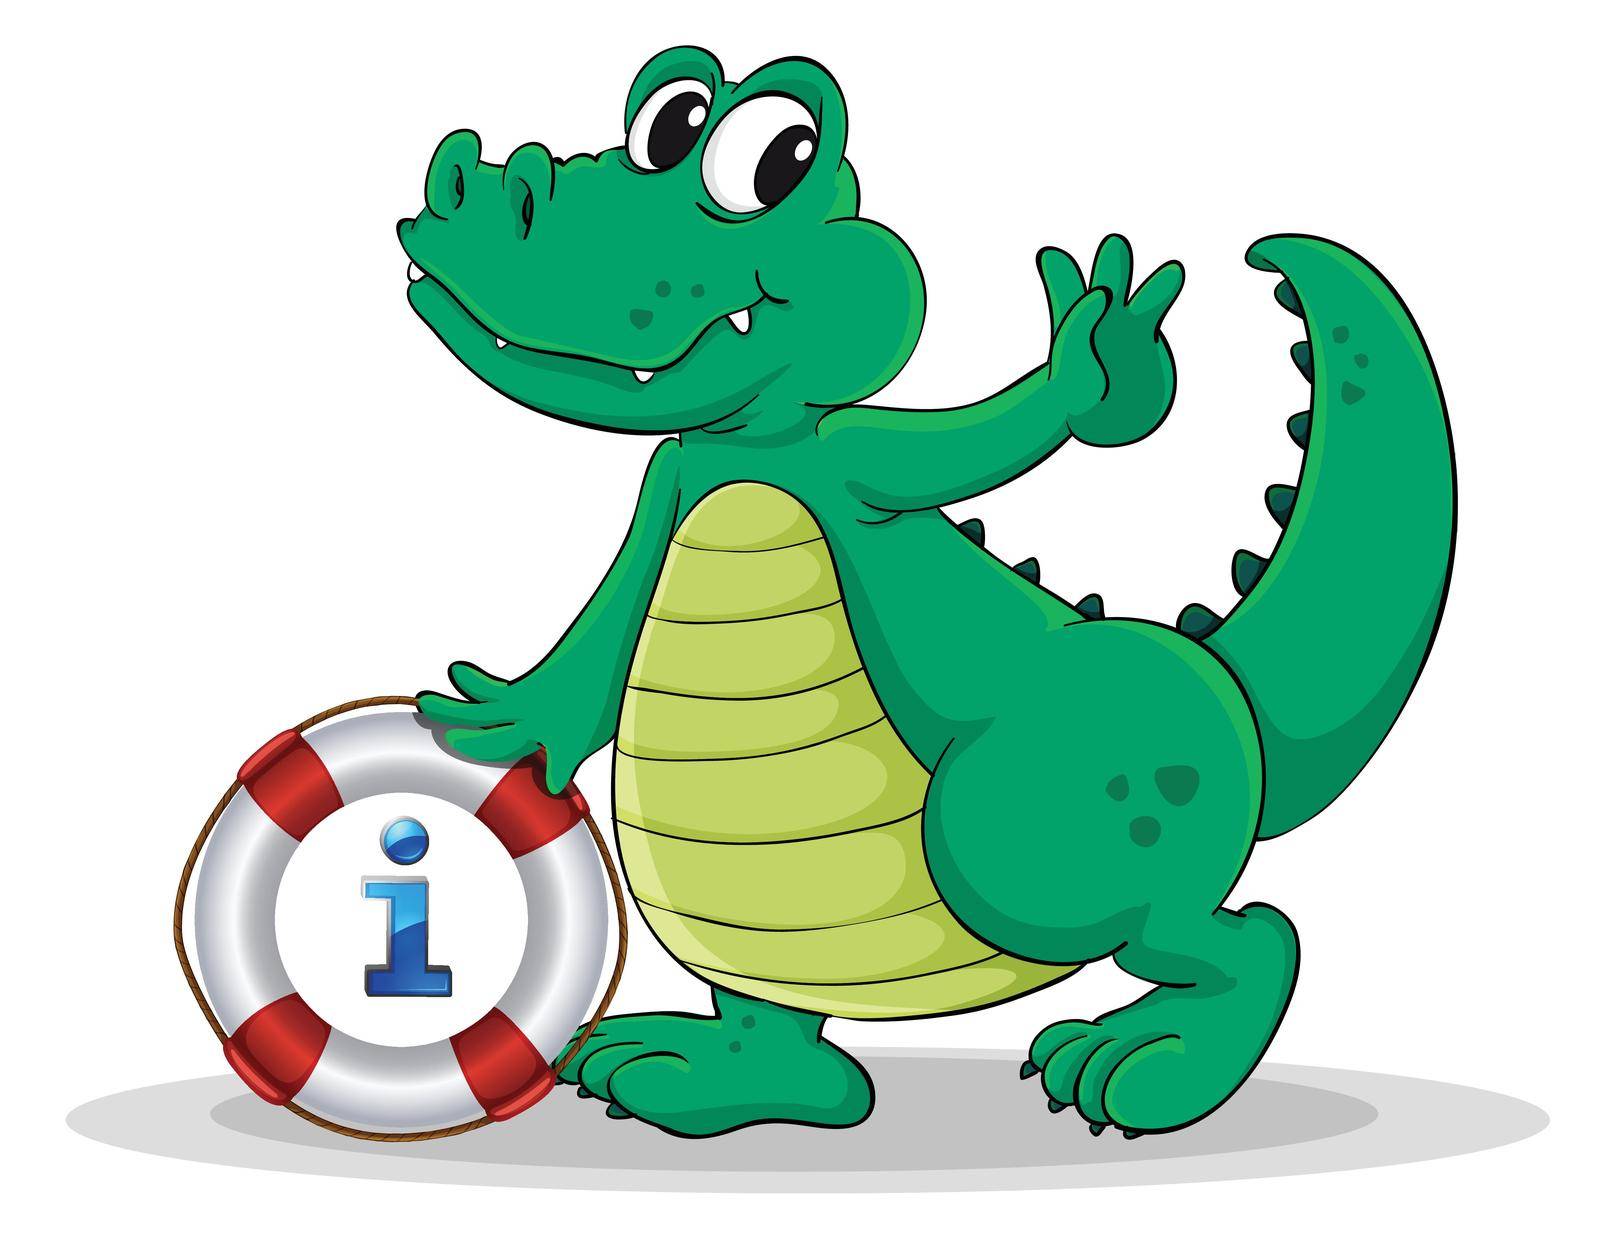 Illustration of a cartoon character and an information icon